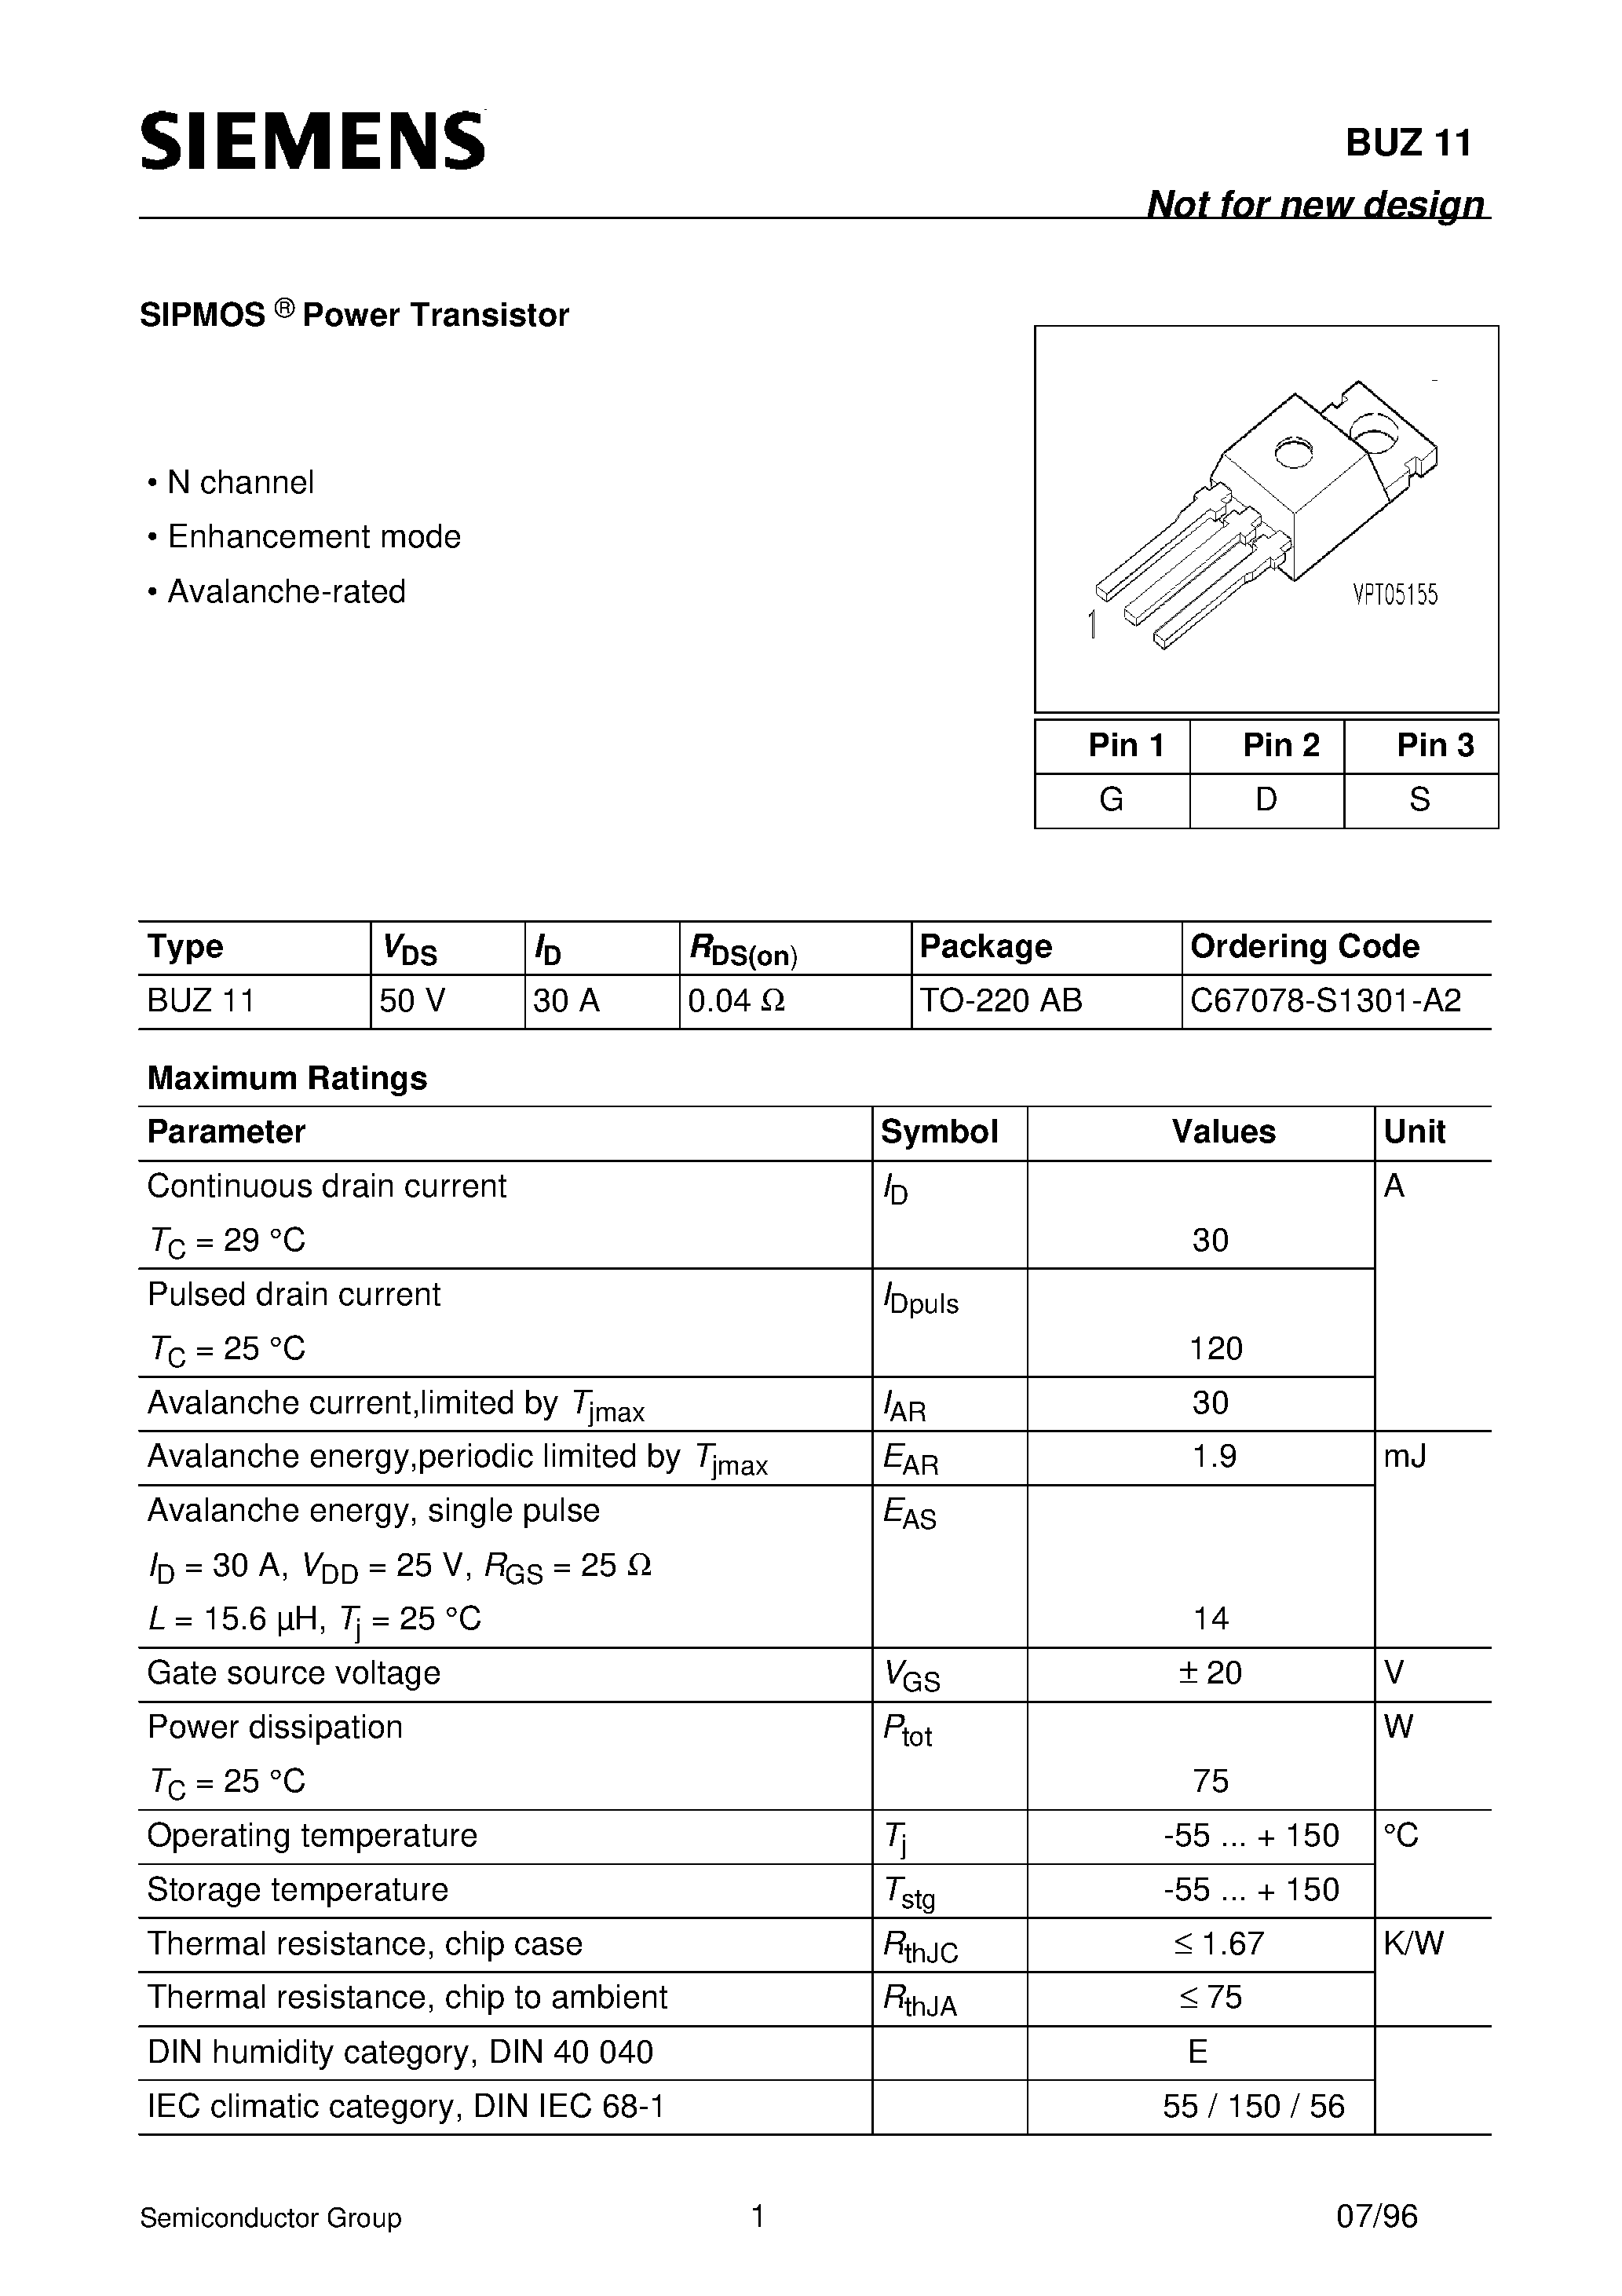 Datasheet BUZ11 - SIPMOS Power Transistorm (N channel Enhancement mode Avalanche-rated) page 1